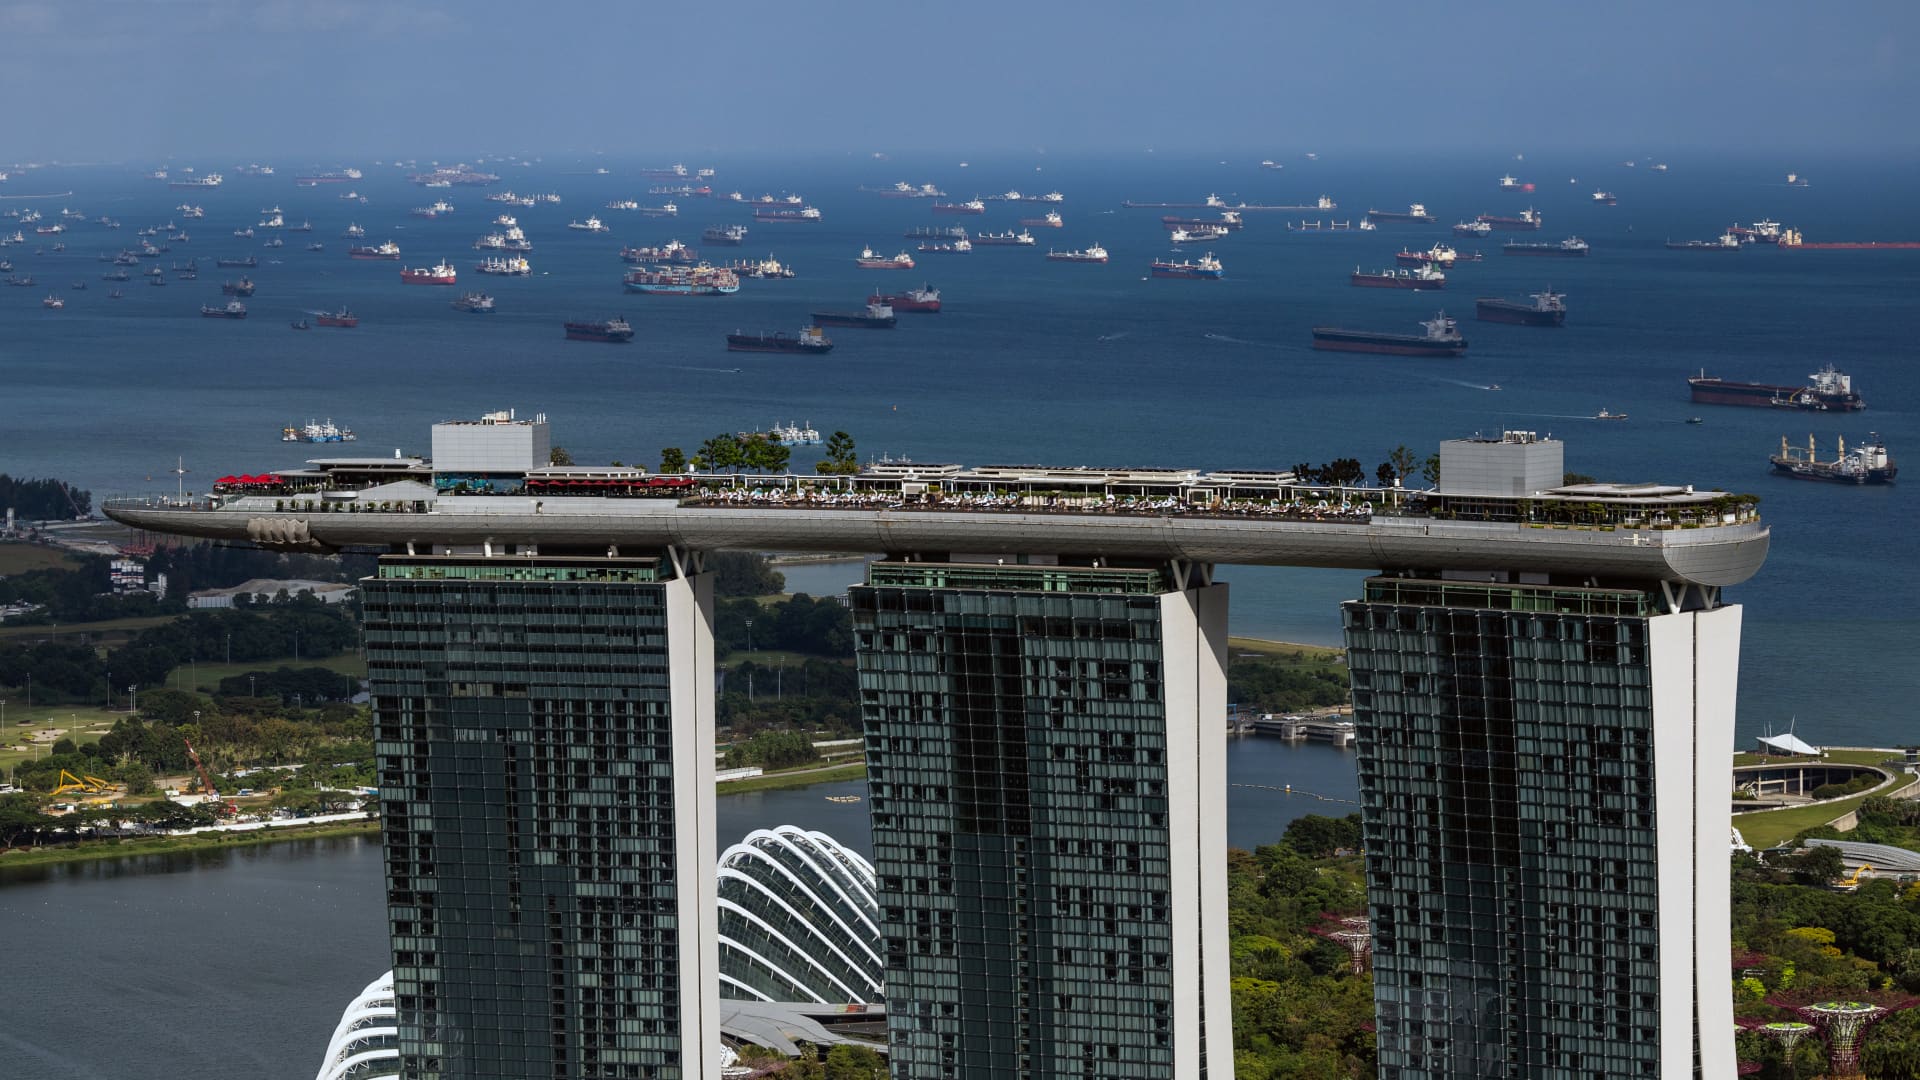 Singapore non oil domestic exports plunge 20.7%, misses anticipations by a massive margin